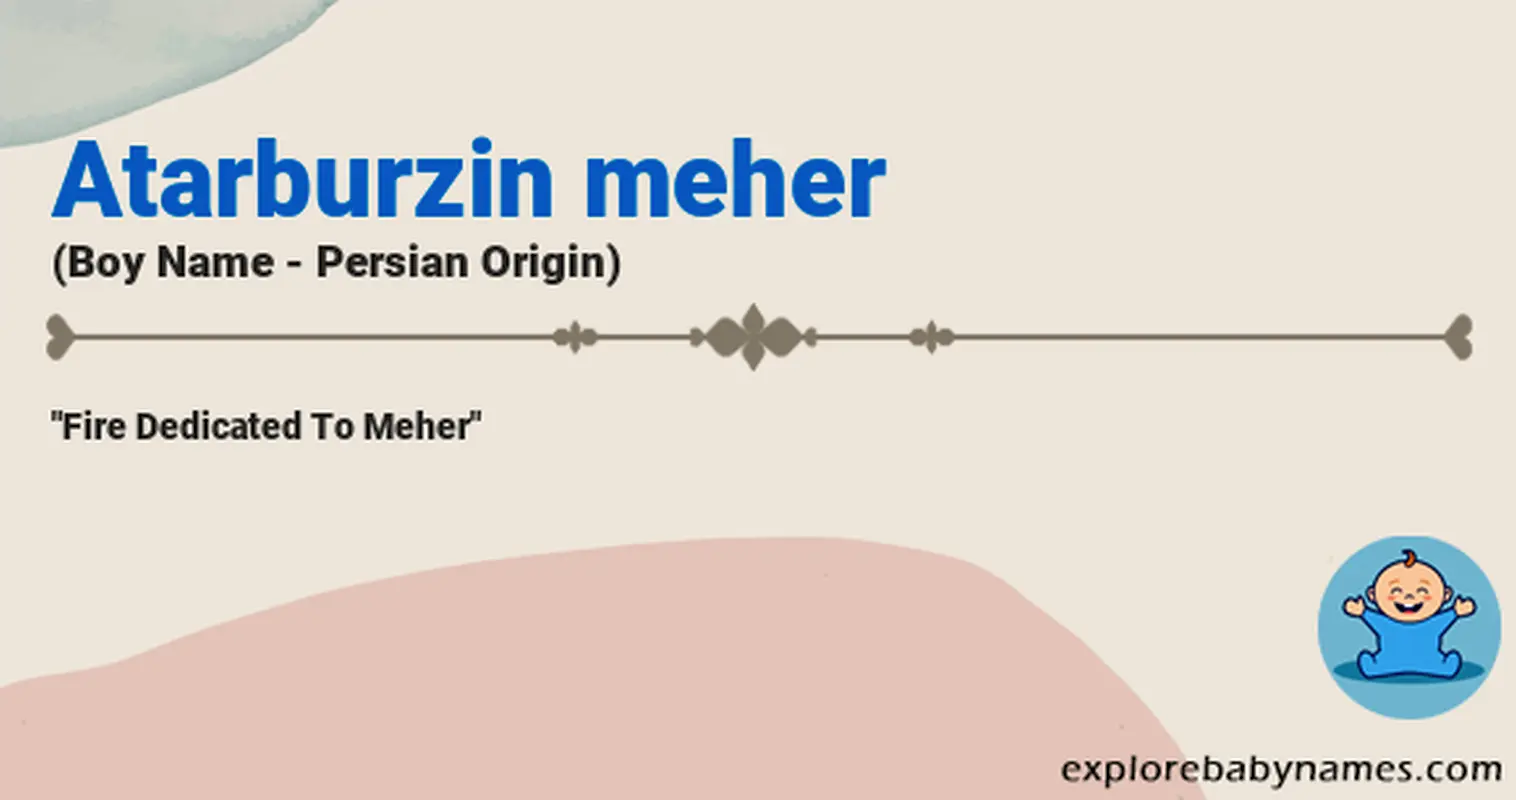 Meaning of Atarburzin meher